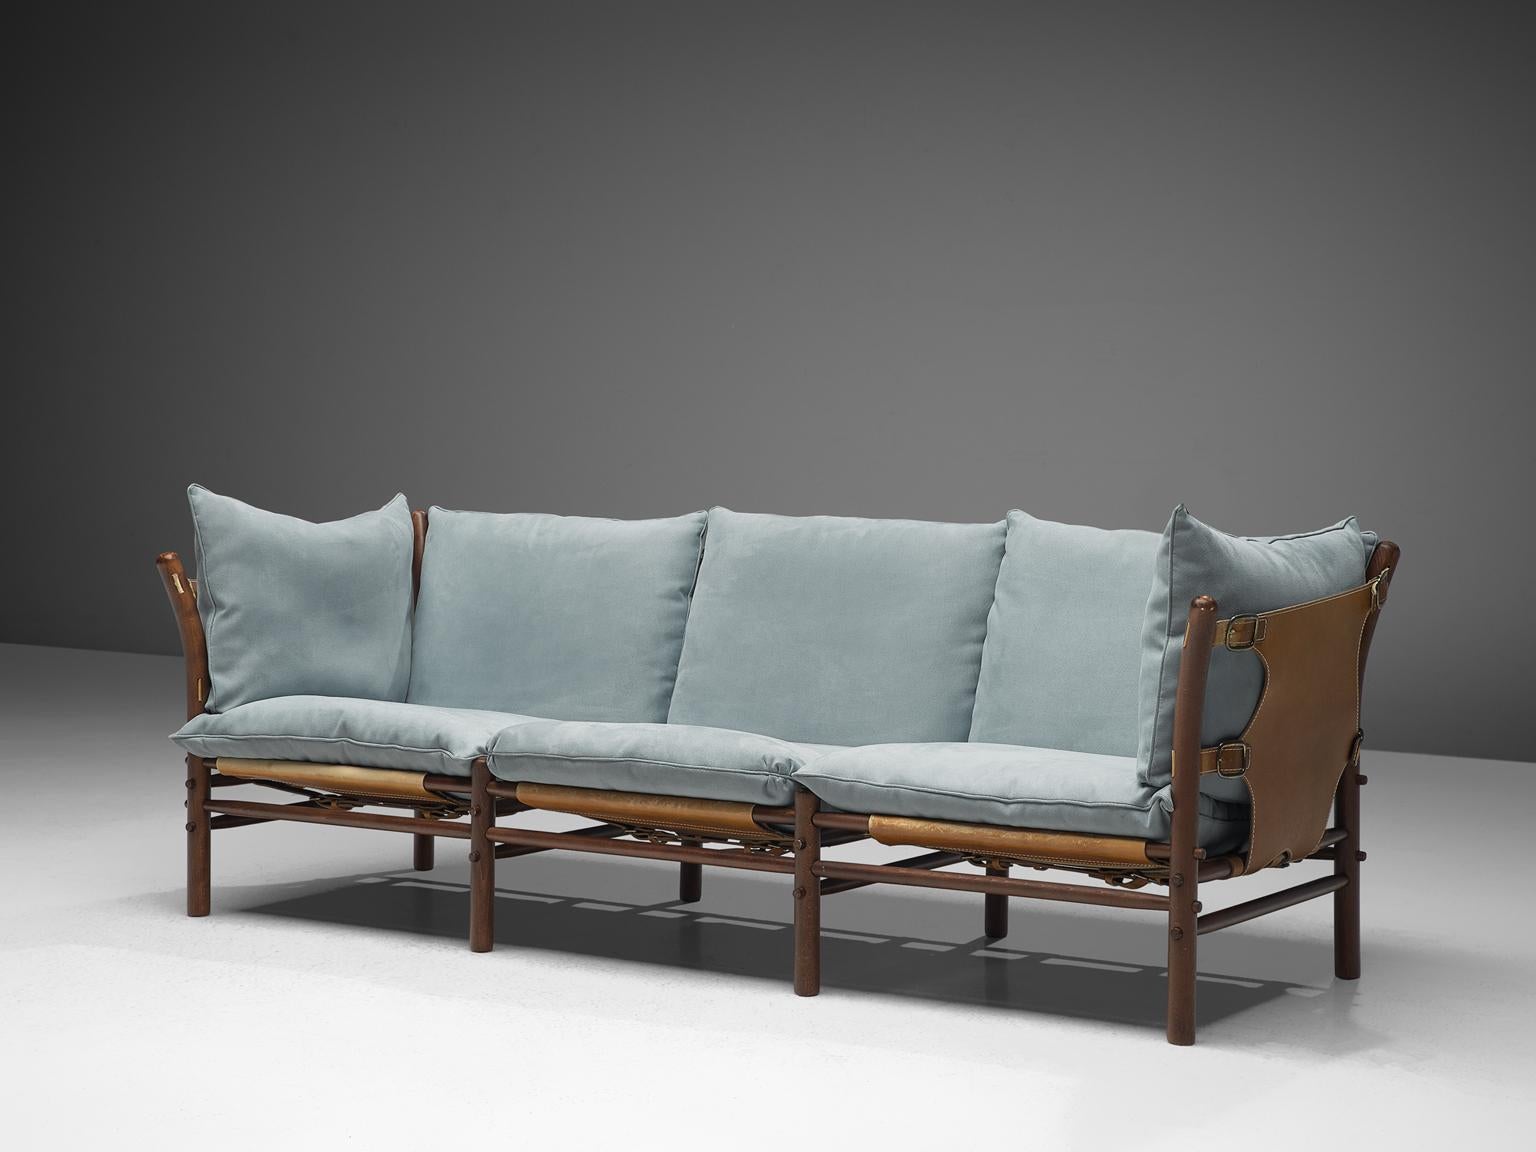 Arne Norell for Norell Möbel, three-seat 'Ilona' sofa, buffalo leather, fabric and beech, Sweden, 1970s.

Swedish three-seat sofa designed by Arne Norell in the 1970s. Beautiful thick buffalo leather is spanned to the beech frame to create the